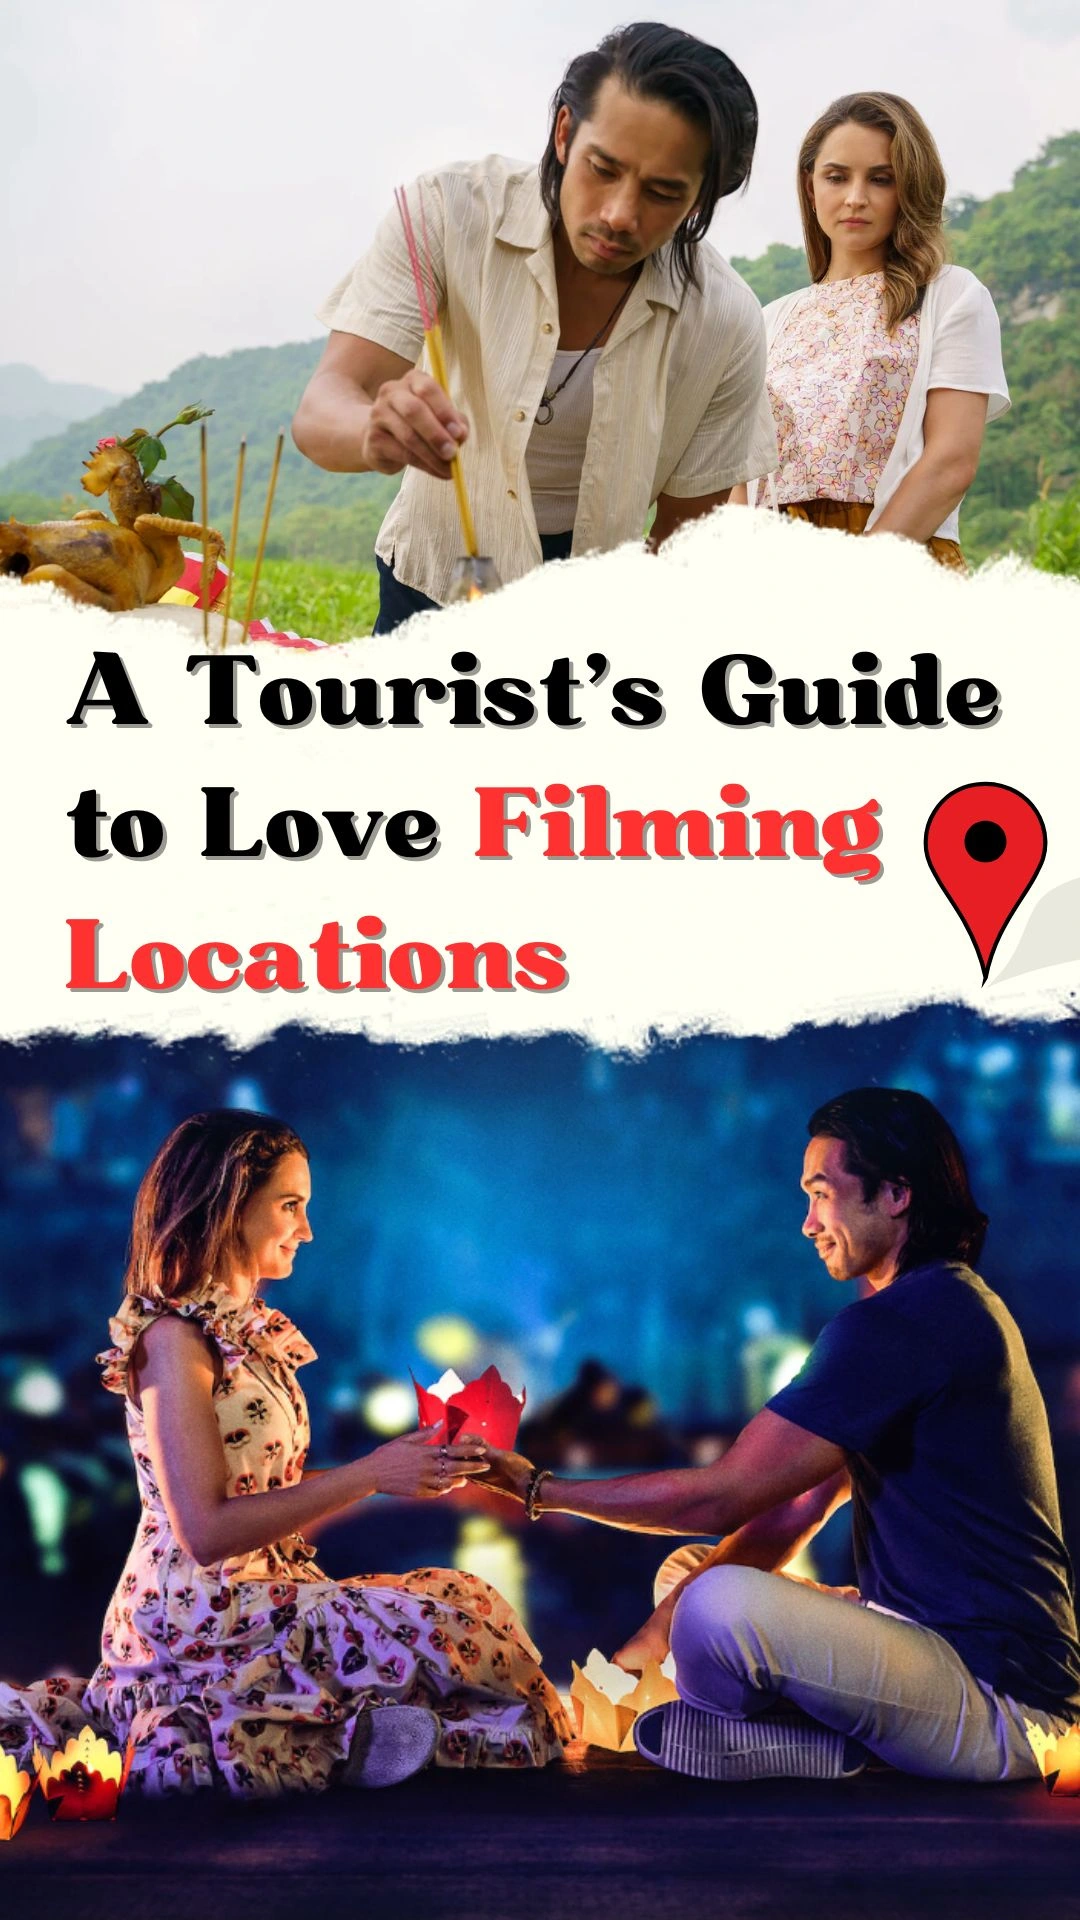 A Tourist's Guide to Love Filming Locations